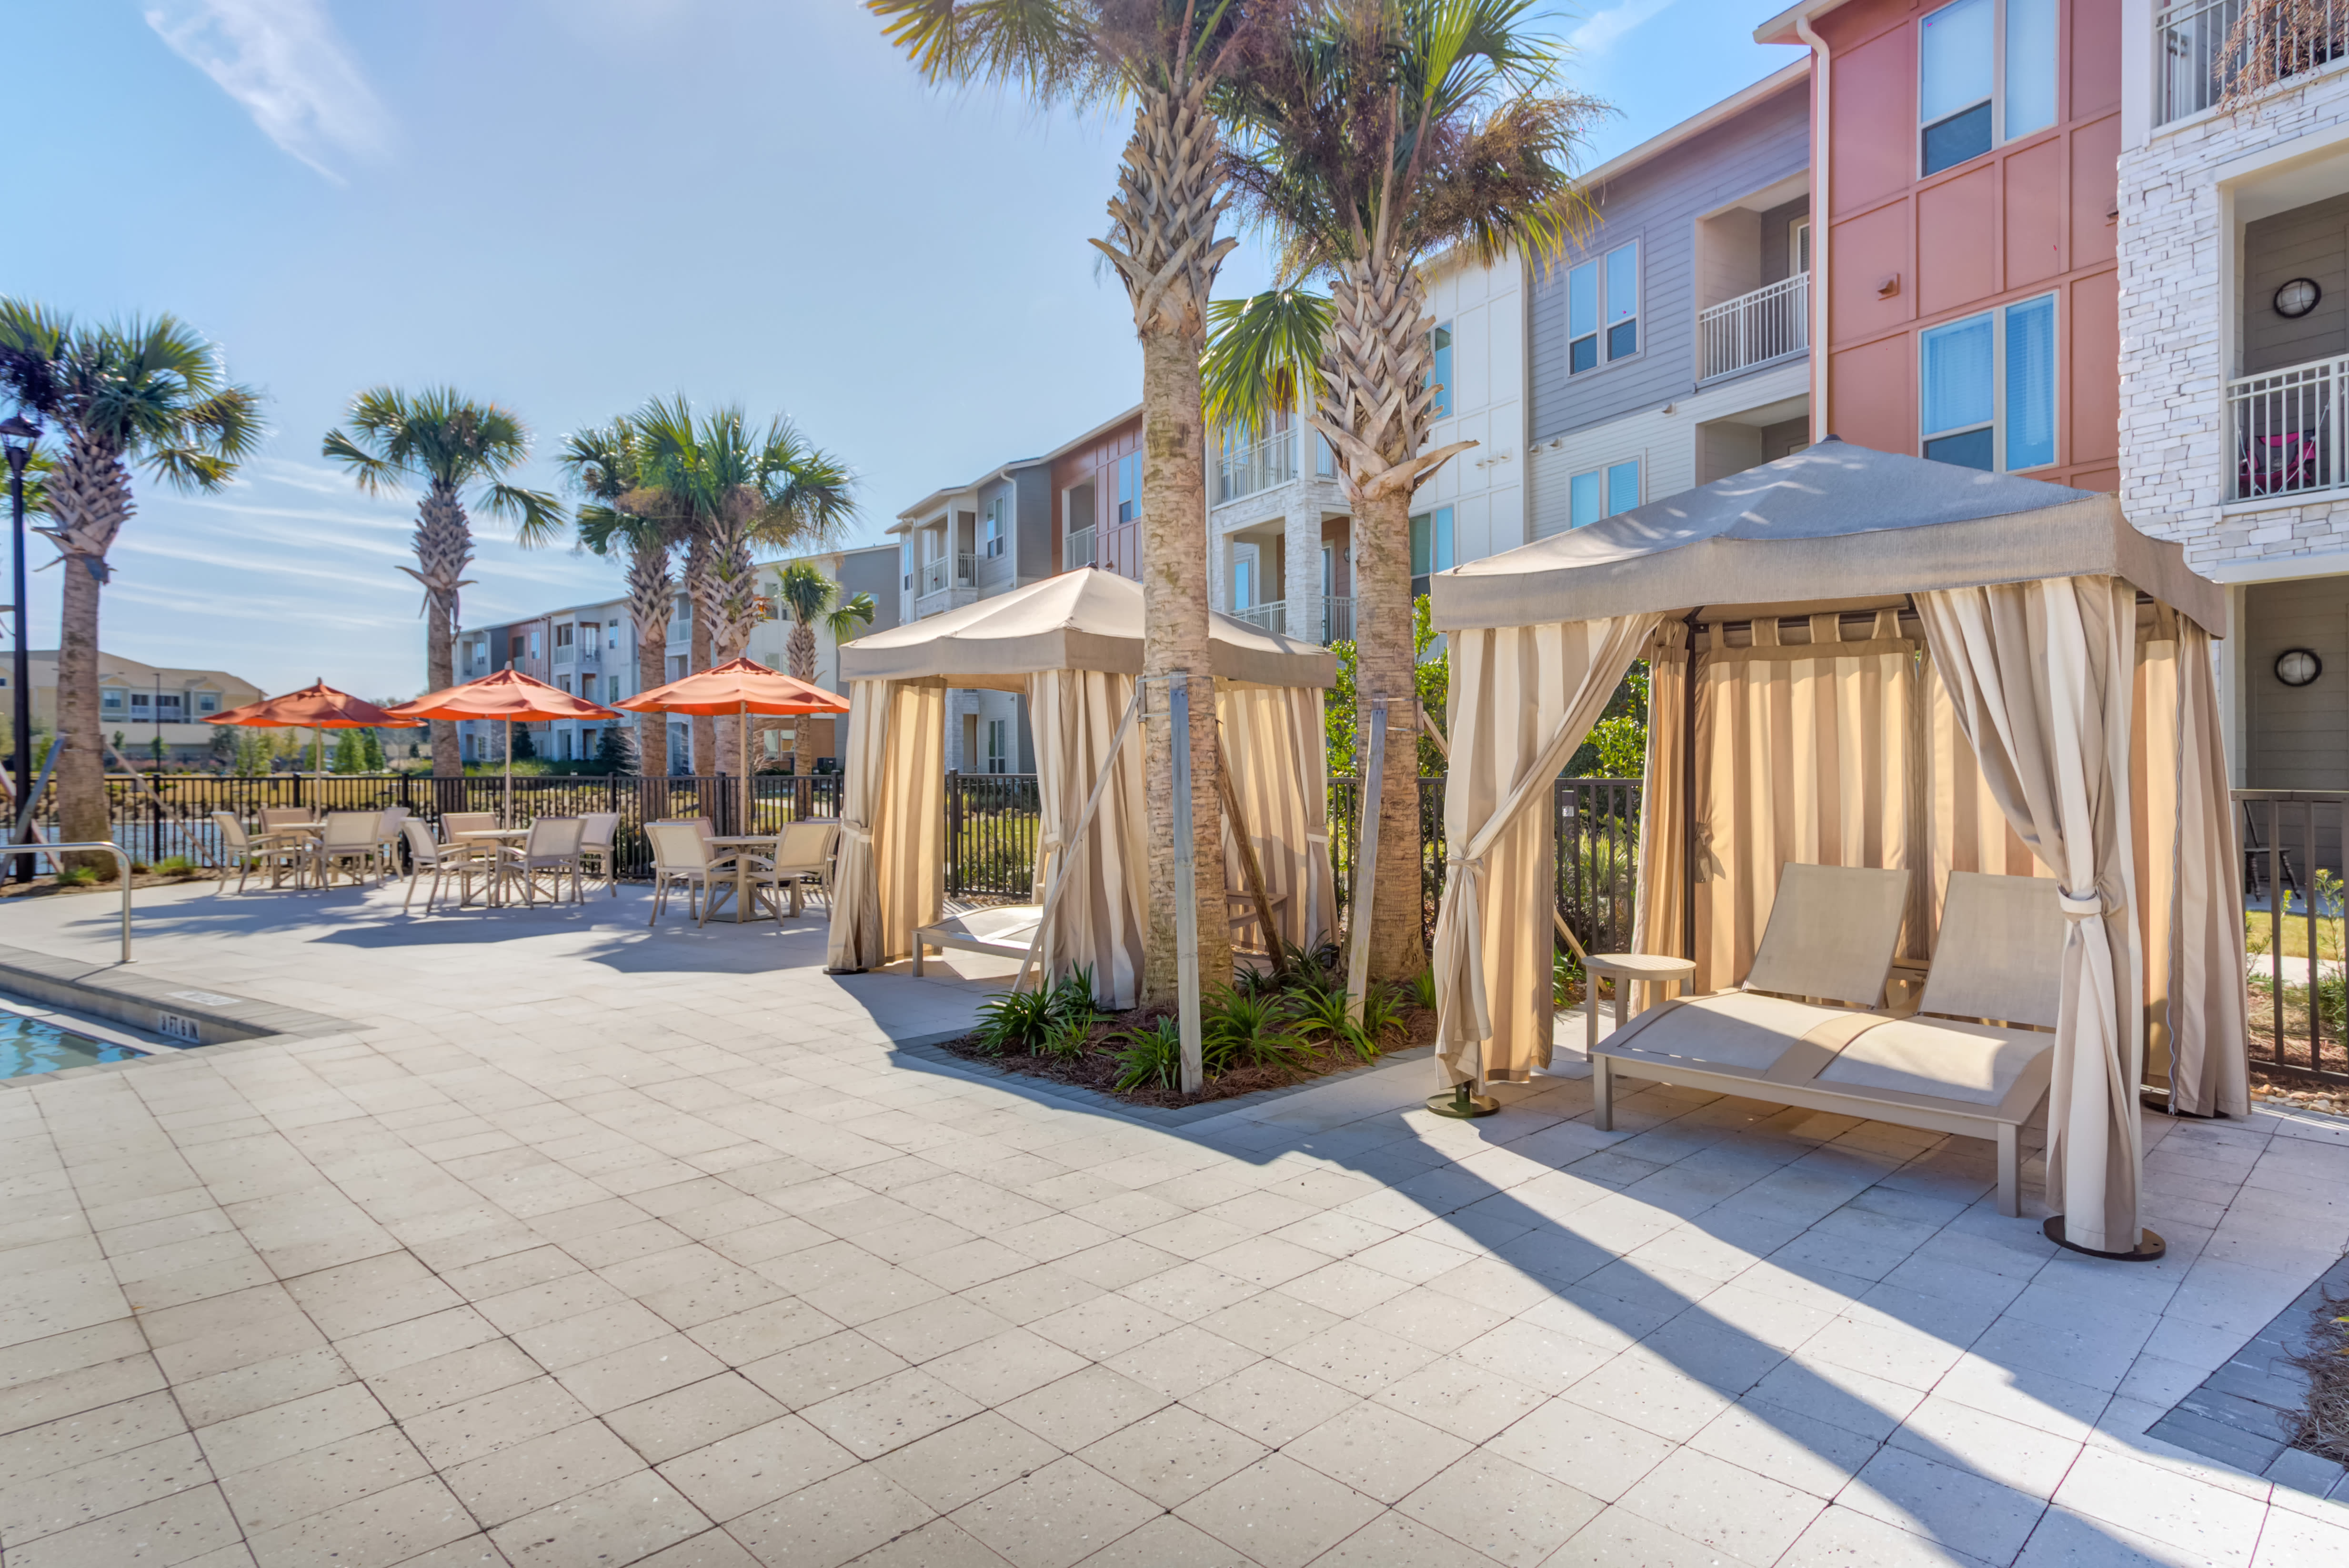 Poolside cabanas at The Point at Town Center in Jacksonville, Florida